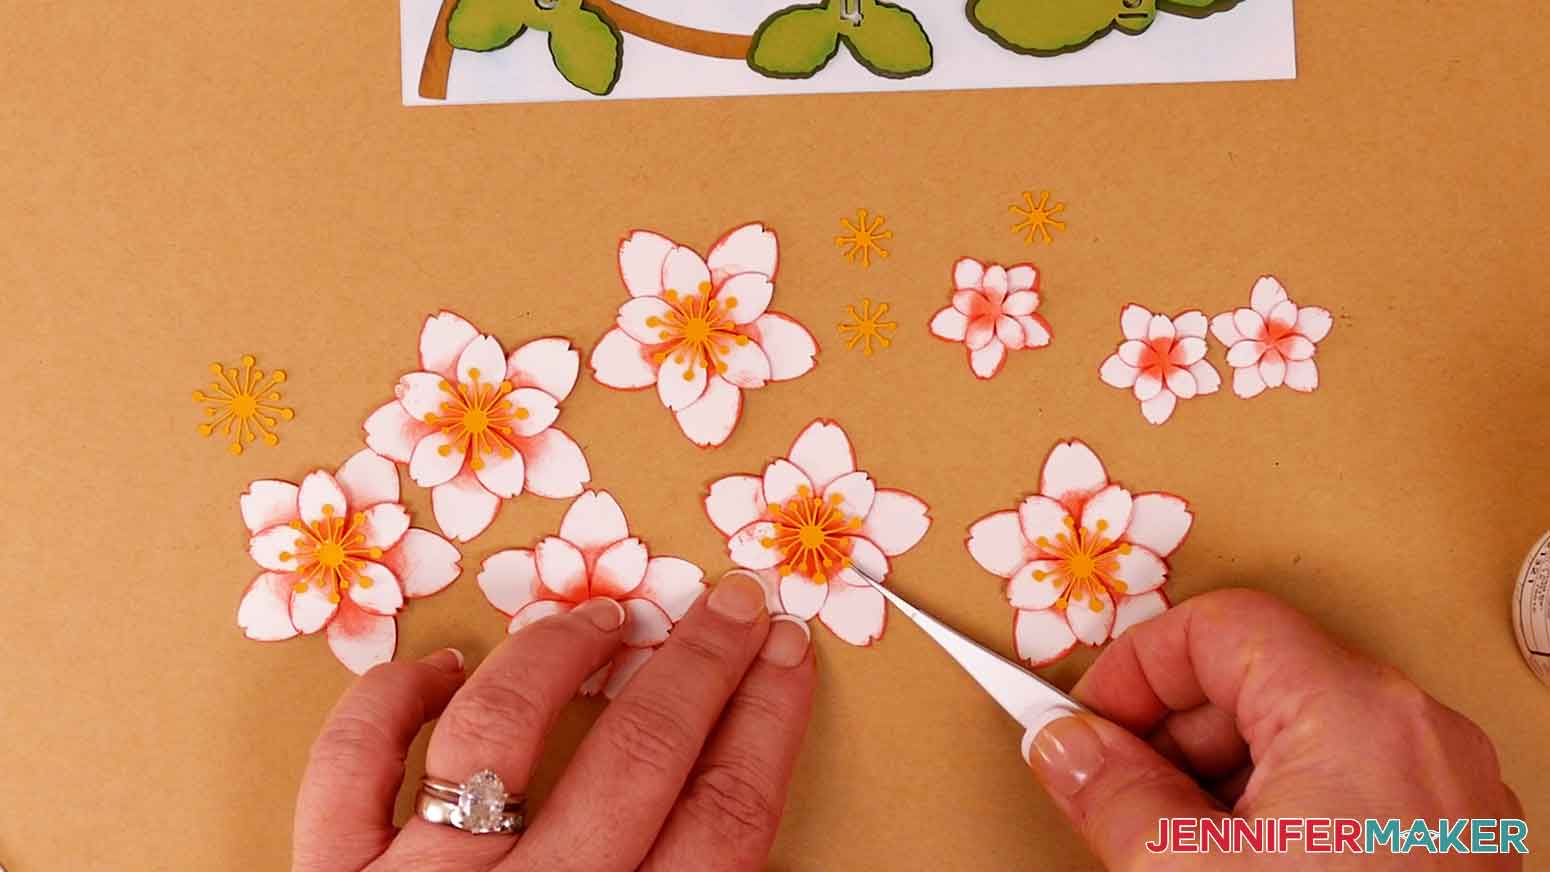 Use craft glue to attach the stamens to the cherry blossom flowers.